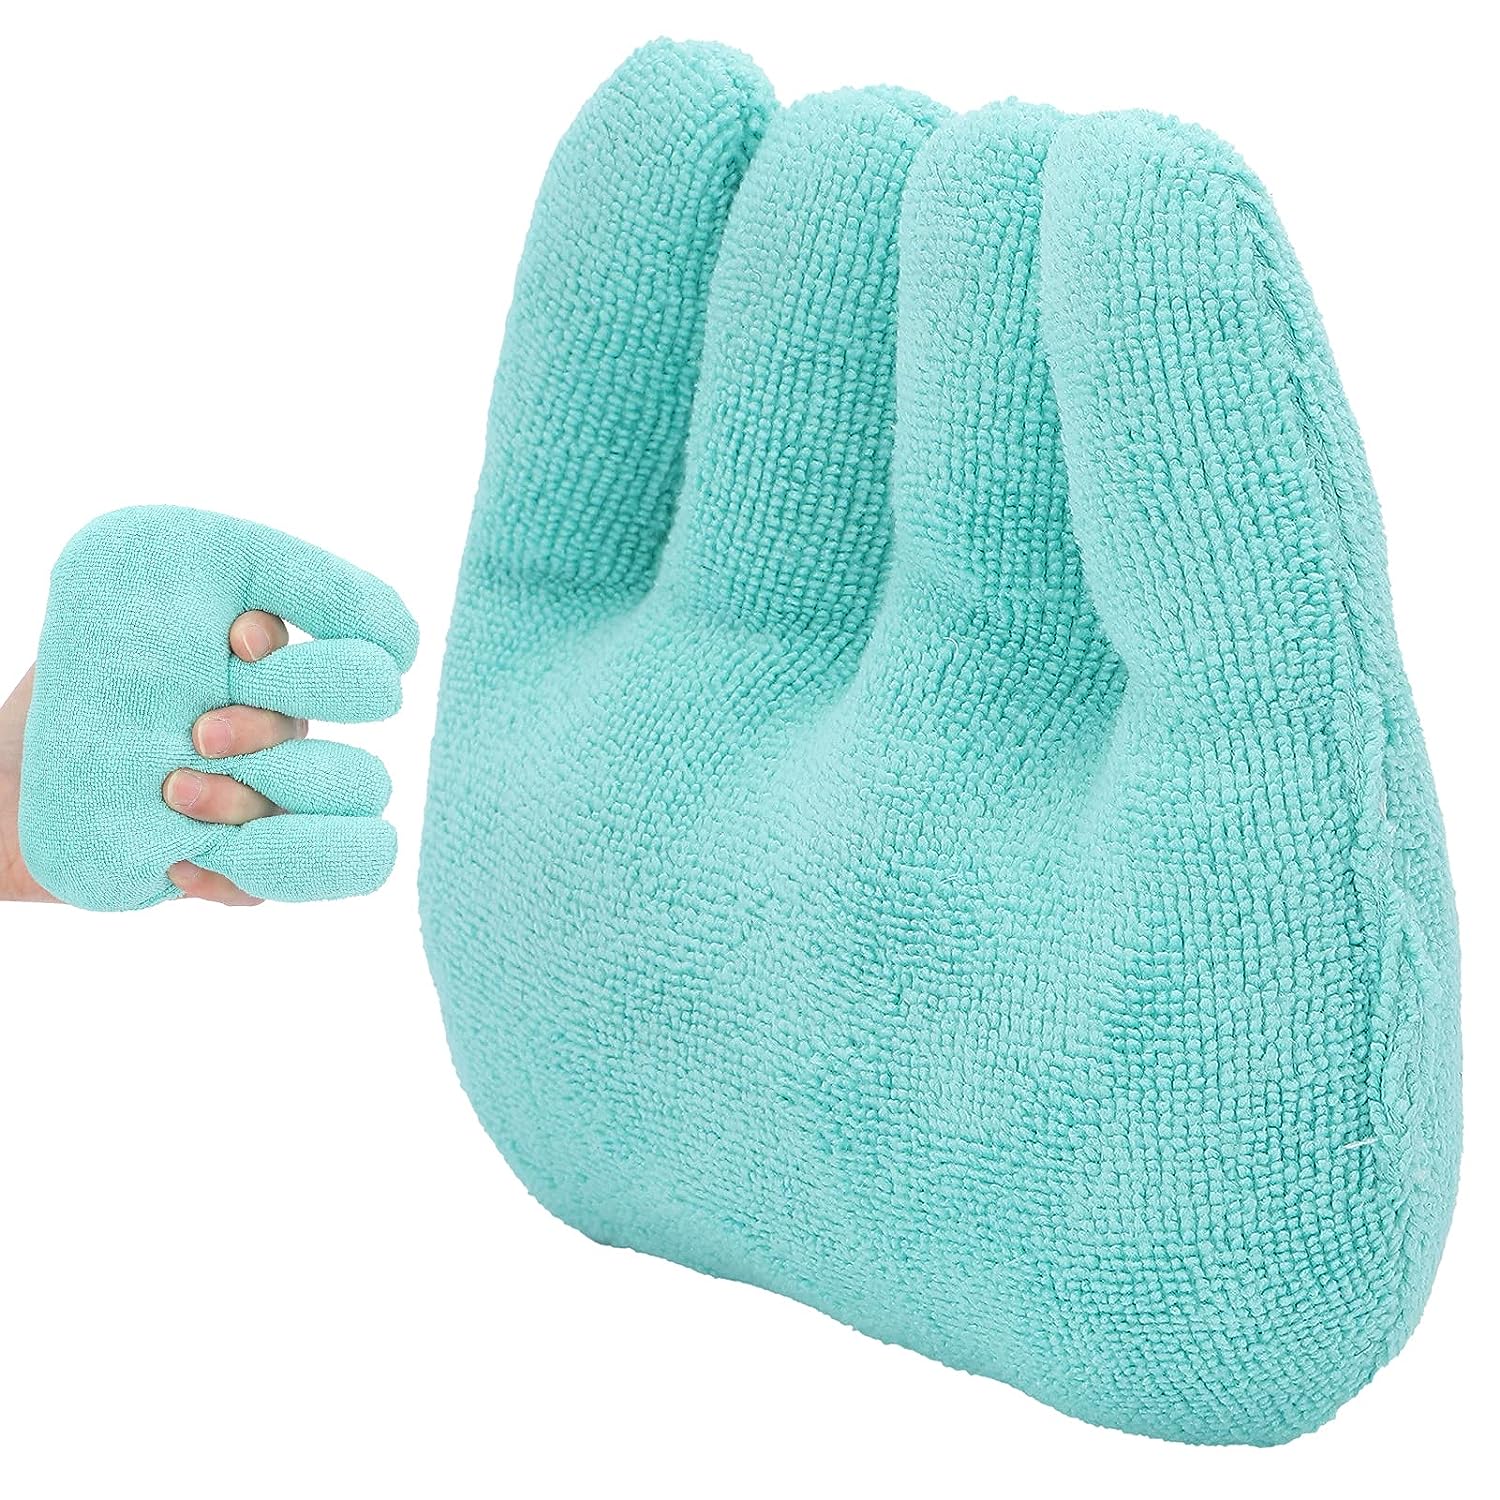 Comfy Hand Finger Contracture Cushion